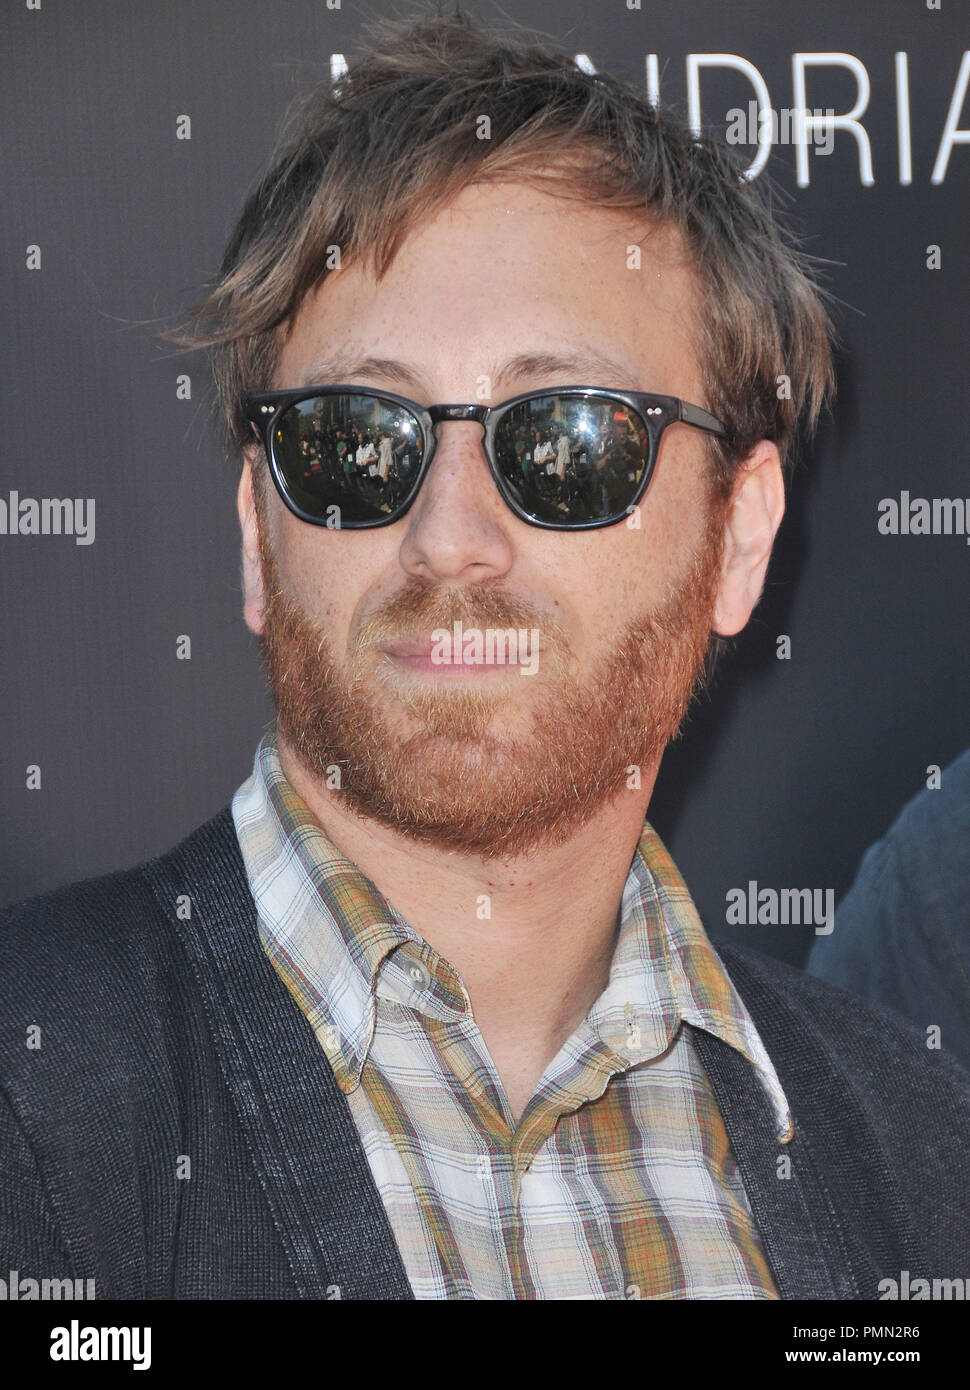 Dan Auerbach of The Black Keys at Tony Hawk's 8th Annual Stand Up For Skateparks Benefit held at Ron Burkle’s Green Acres Estate in Beverly Hills, CA. The event took place on Sunday, October 2, 2011. Photo by PRPP Pacific Rim Photo Press/ PictureLux Stock Photo